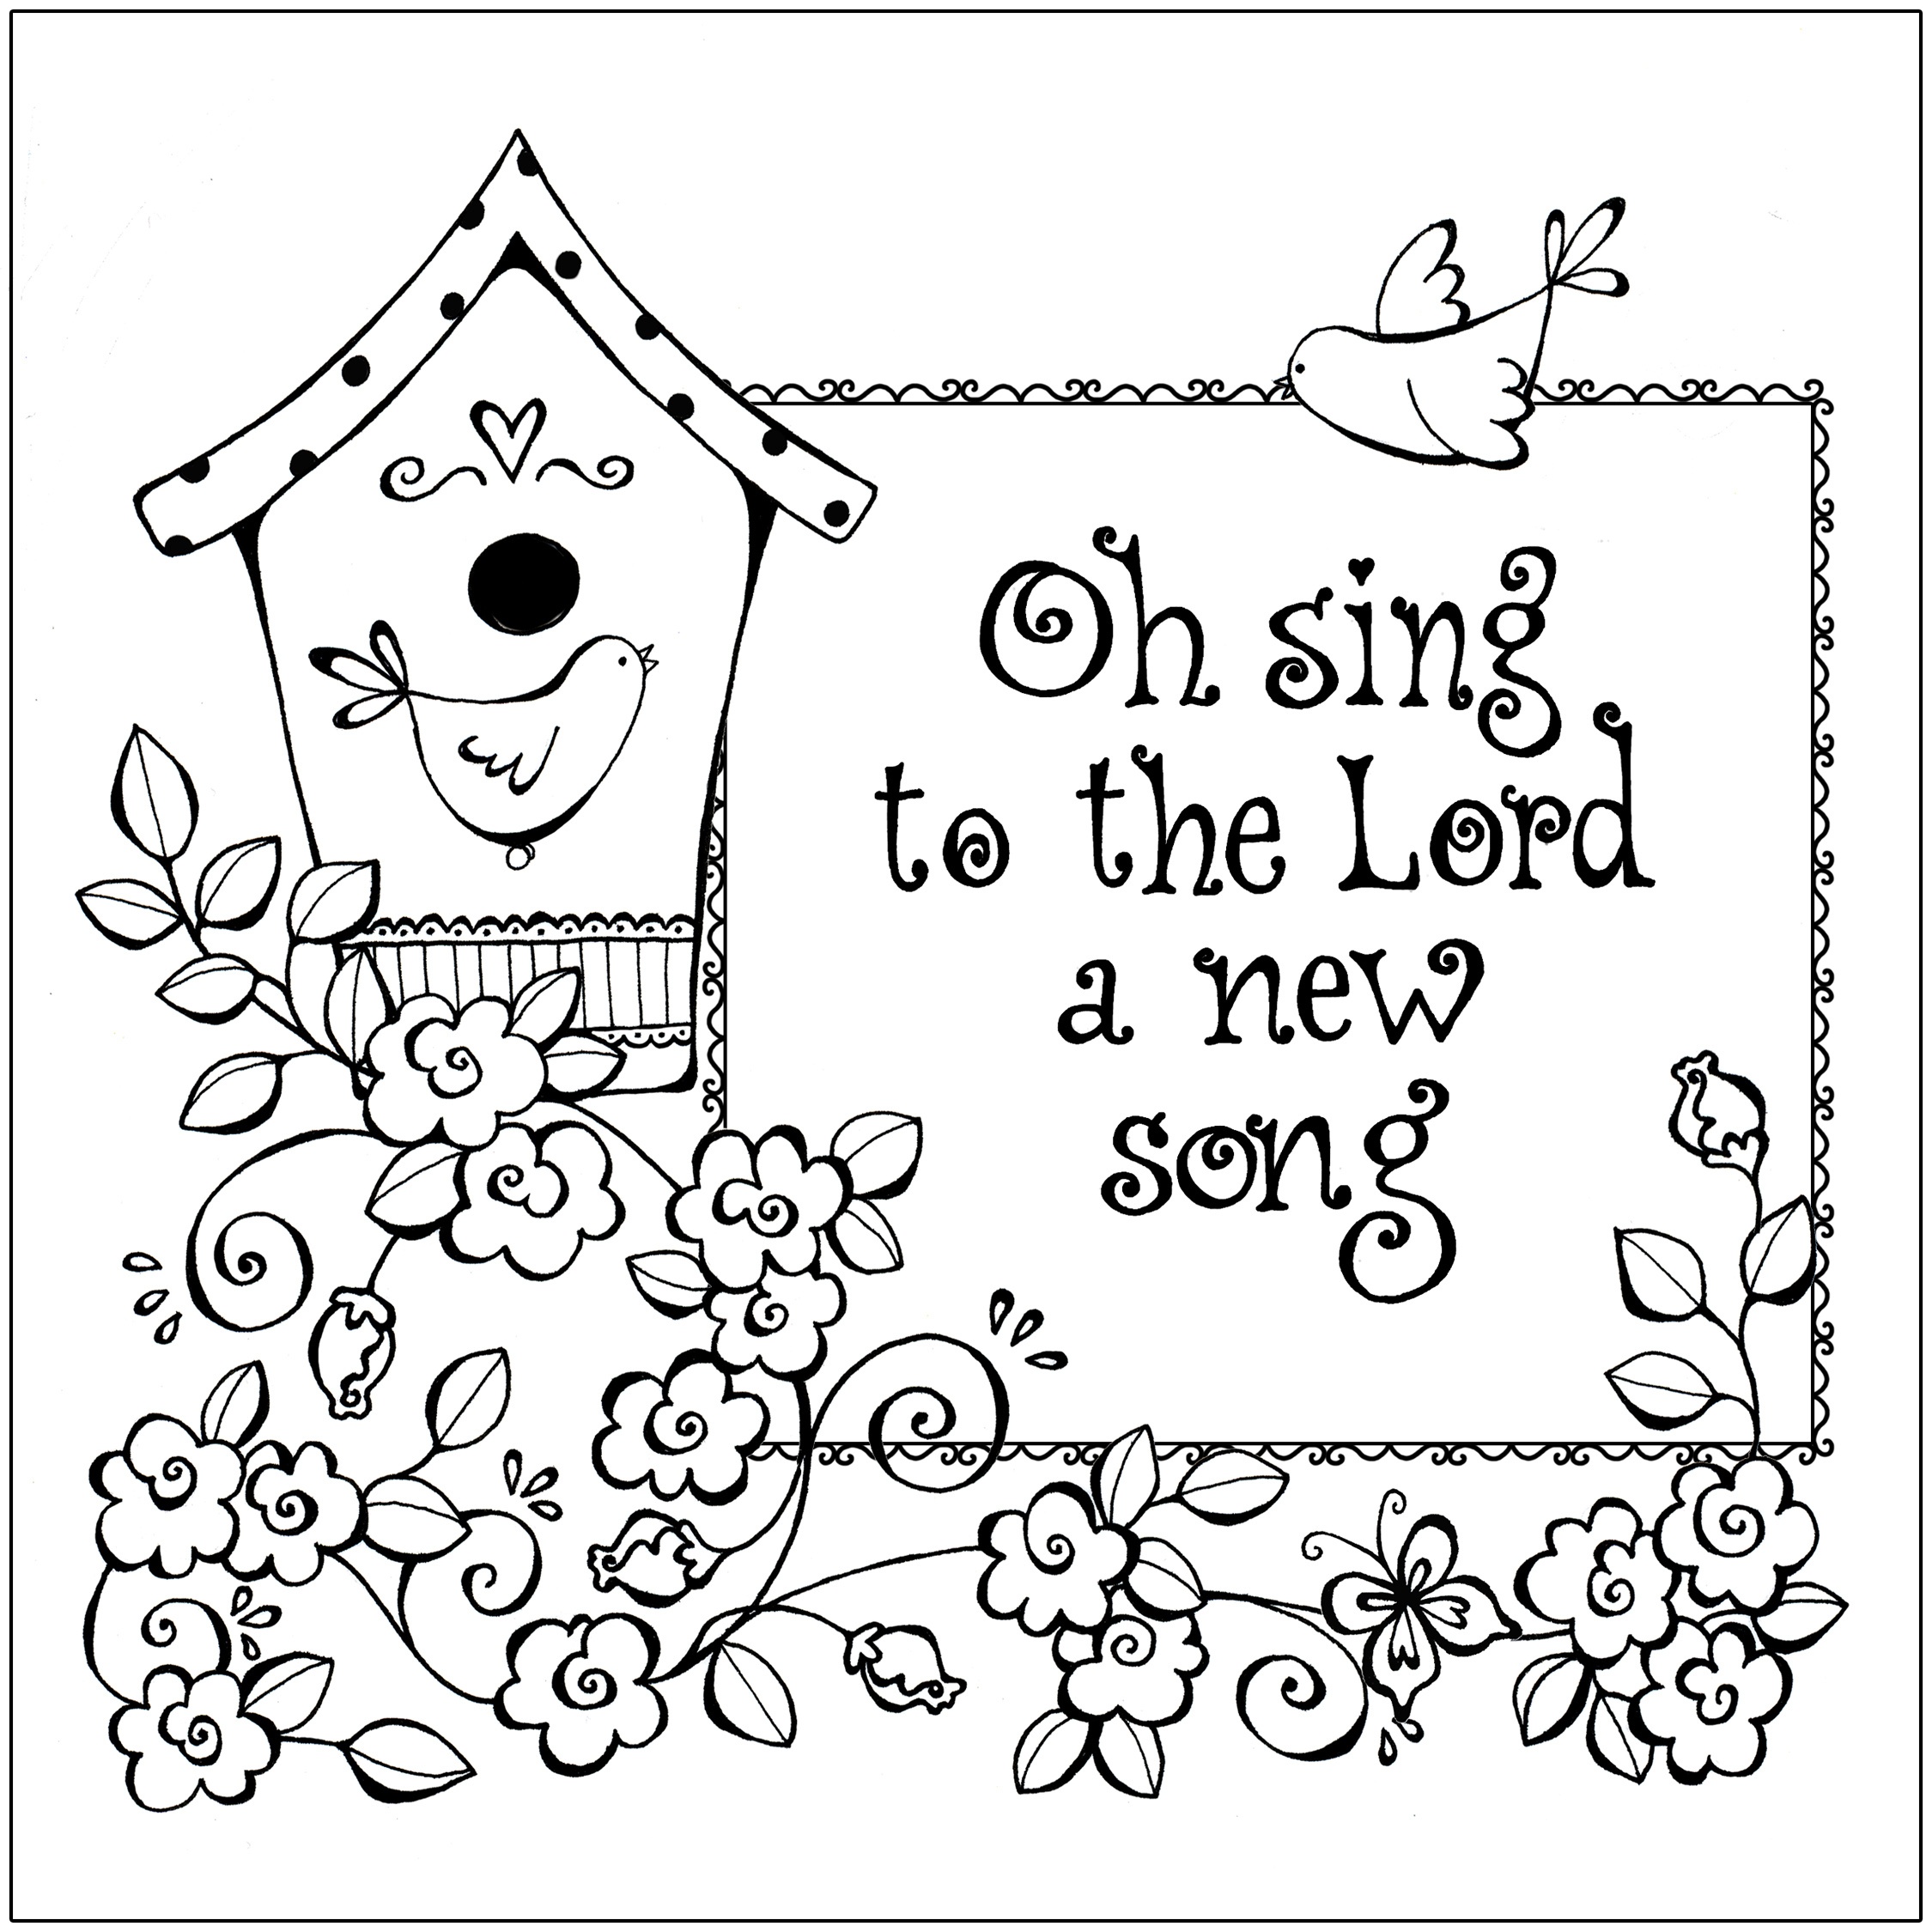 Free Printable Christian Coloring Pages For Kids - Best Coloring - Free Printable Bible Coloring Pages